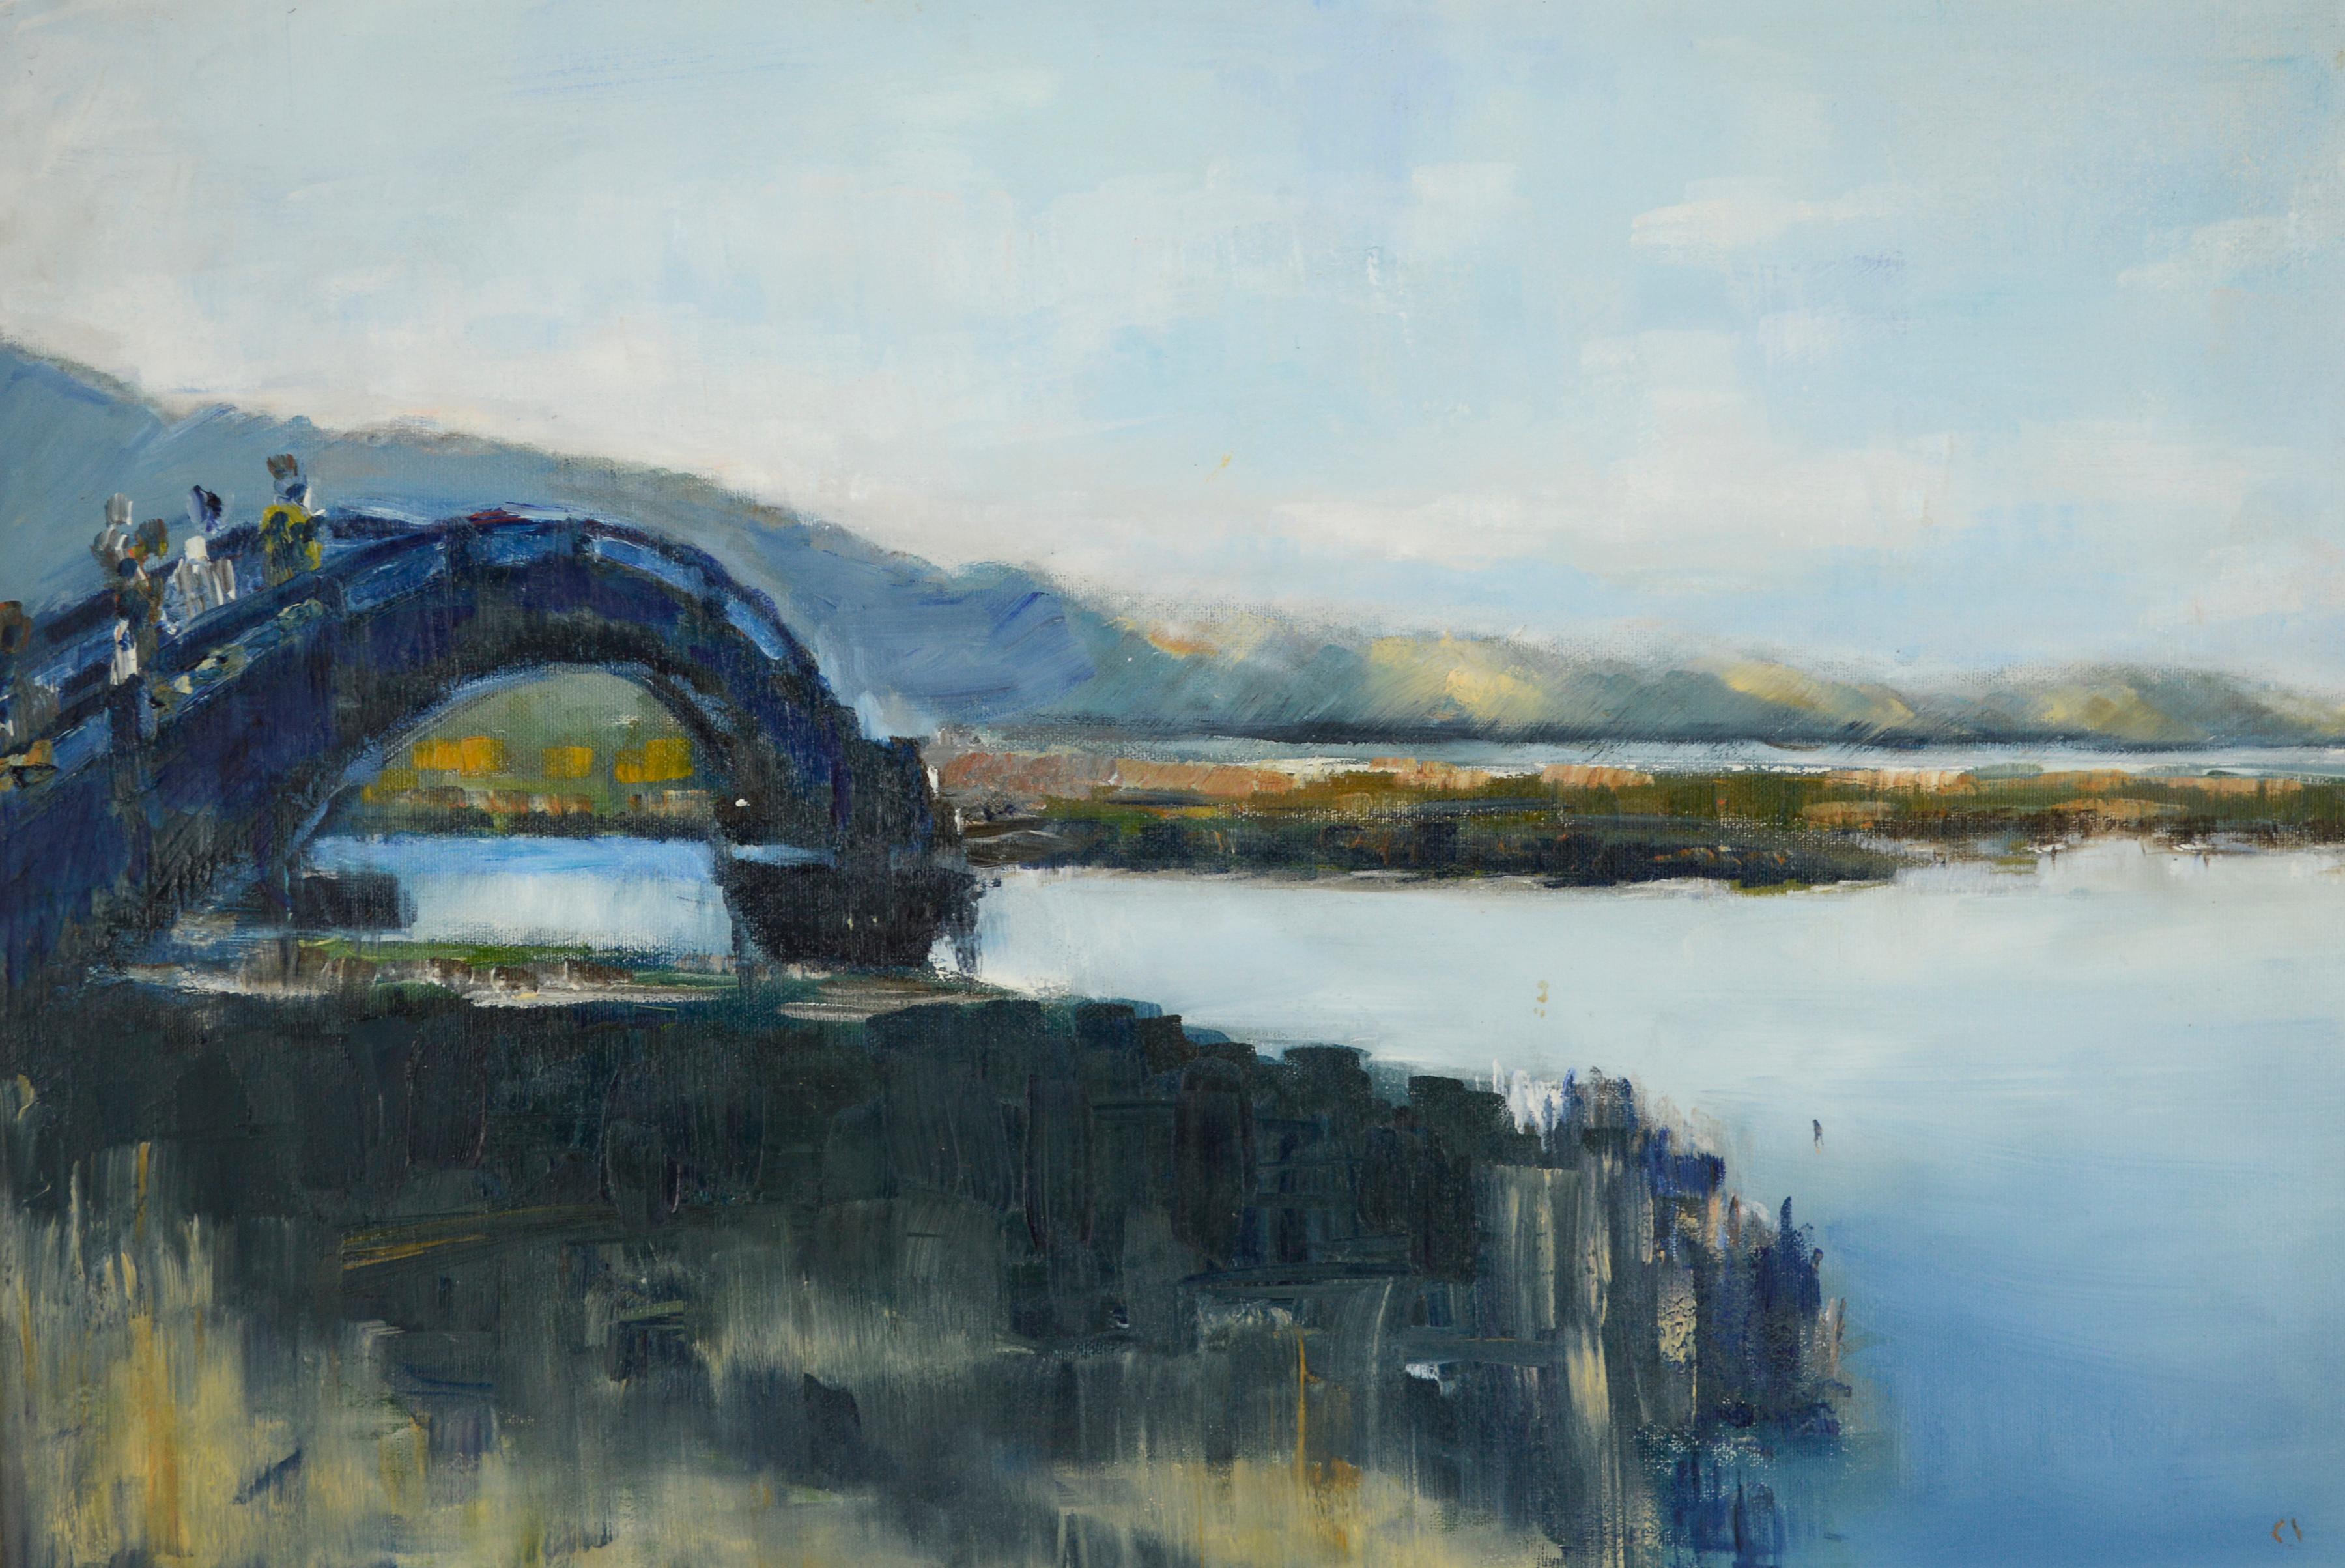 Over the Bridge, Armenia - Mid Century Figurative Landscape  - Impressionist Painting by Hovanessian